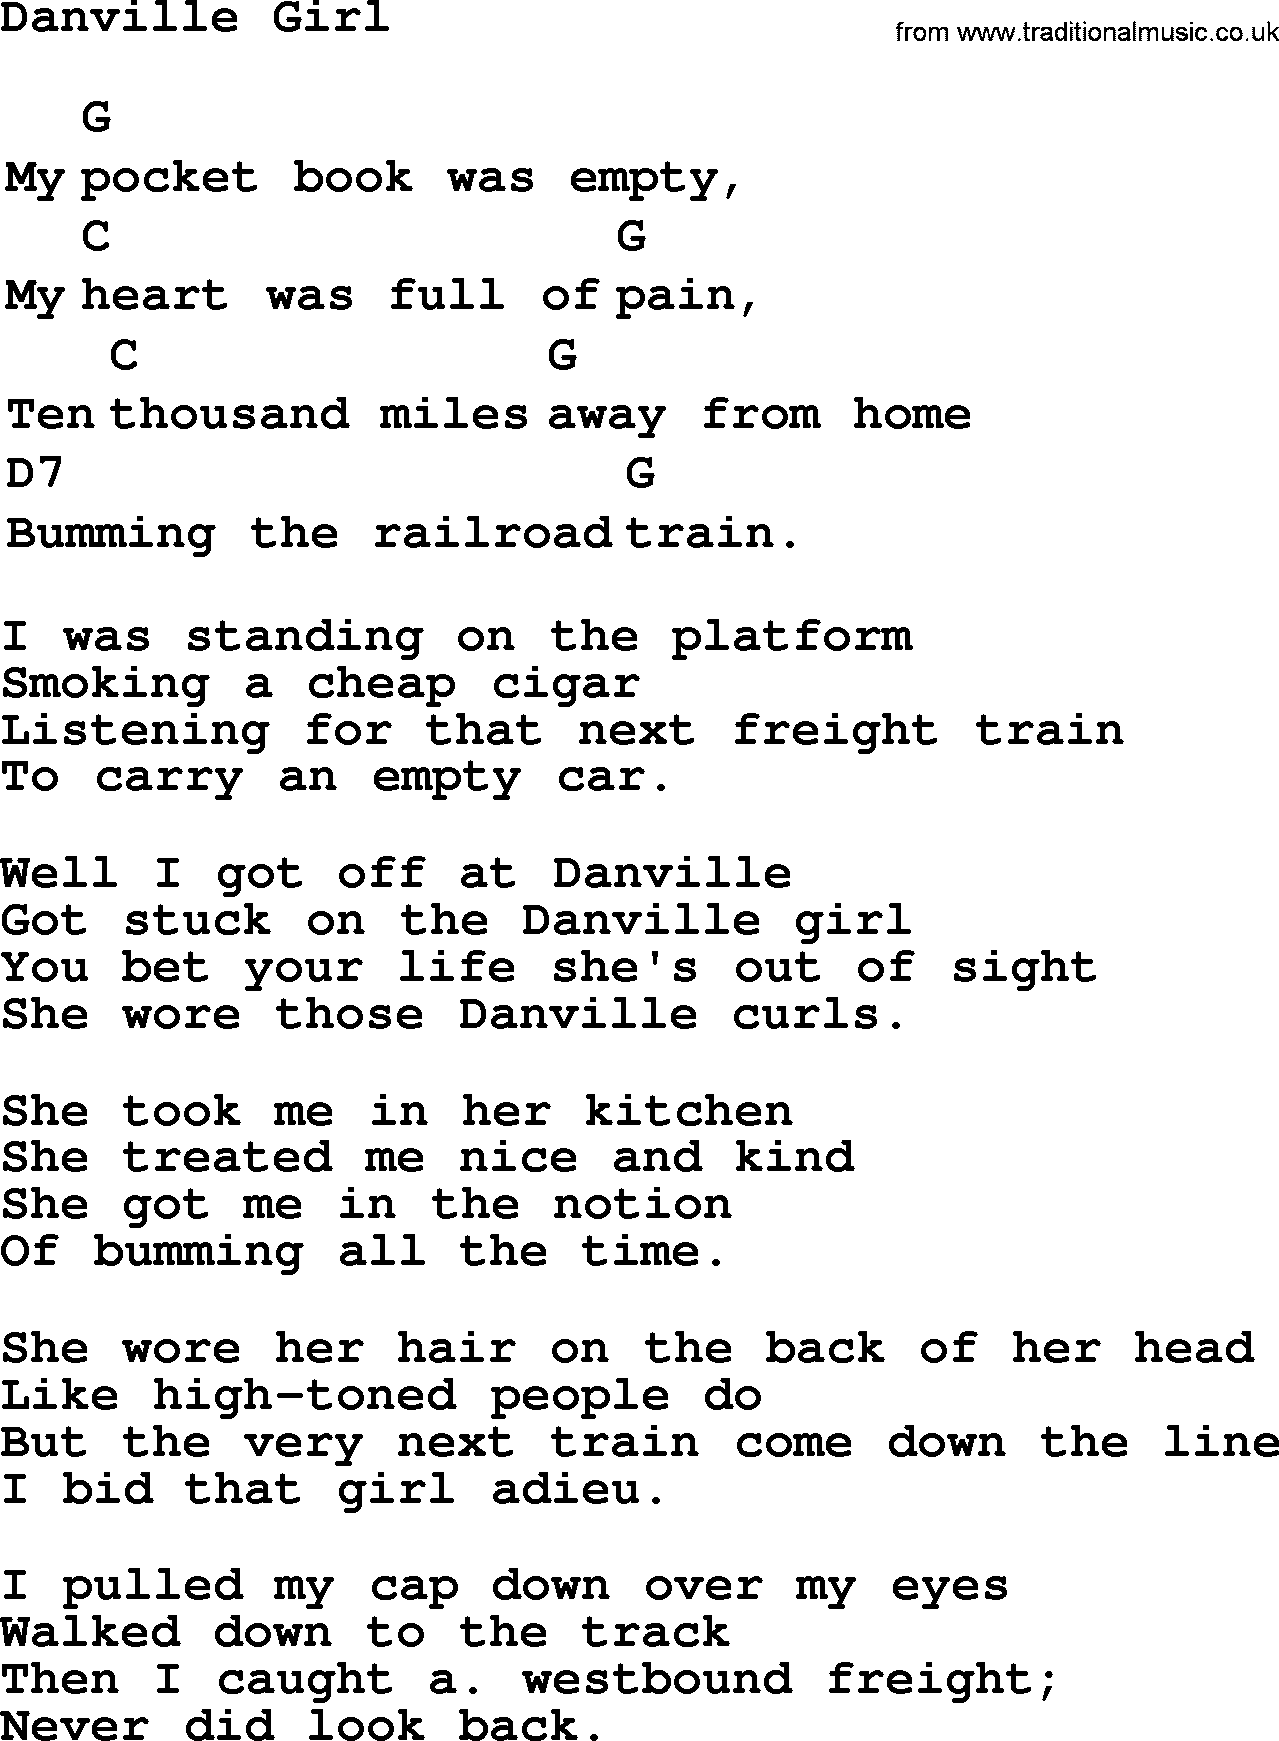 Top 1000 Most Popular Folk and Old-time Songs: Danville Girl, lyrics and chords